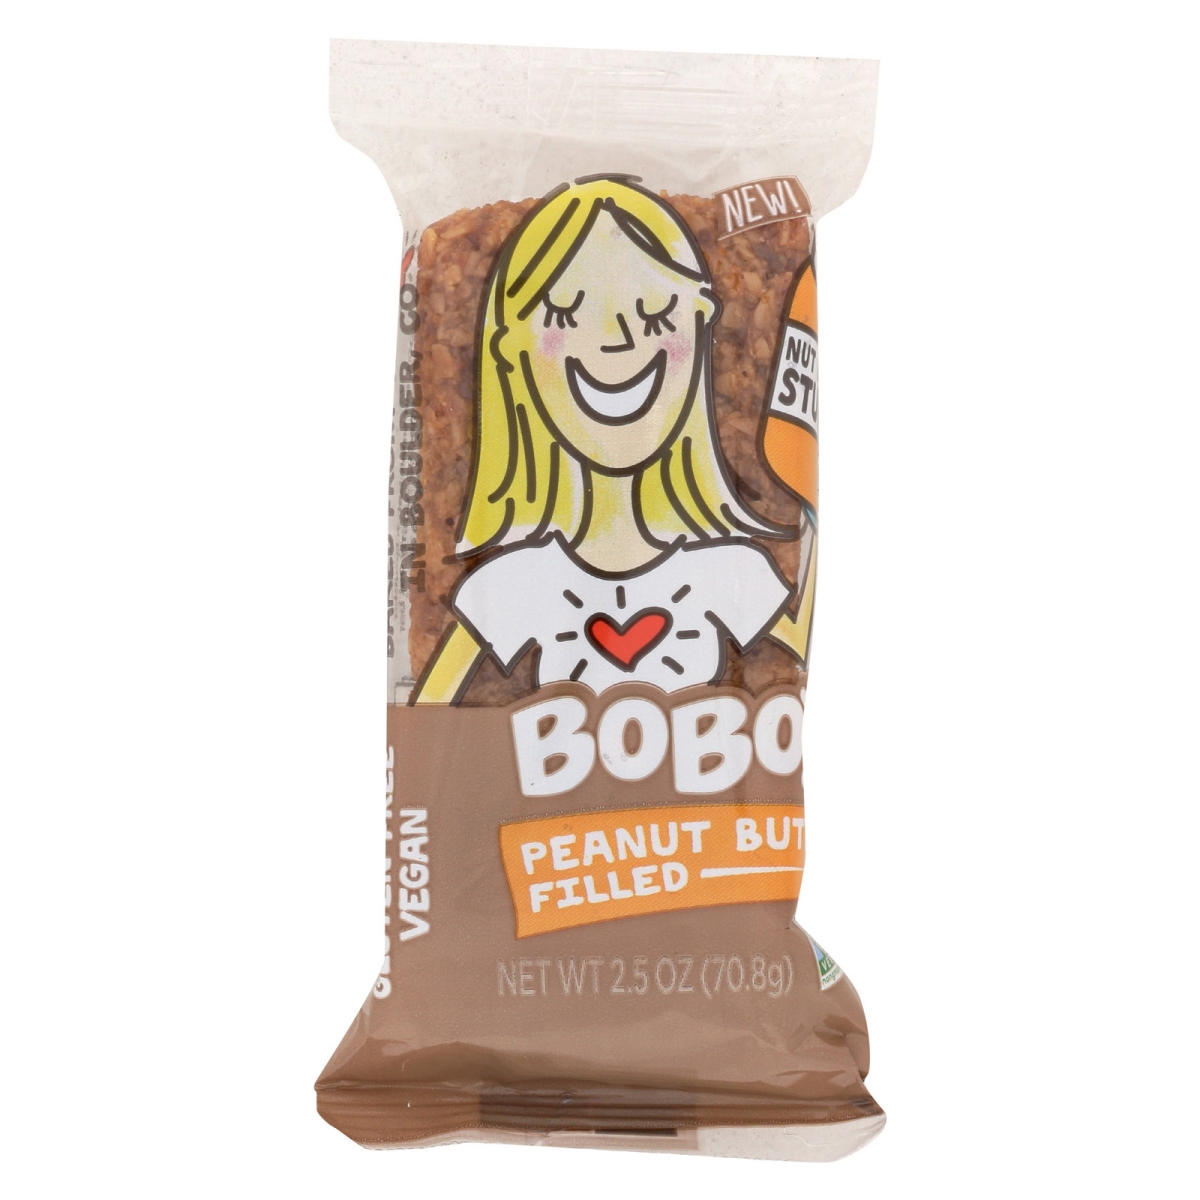 Picture of Bobos Oat Bars 2060374 2.5 oz Peanut Butter Filled Chocolate Chip Oat Bar 